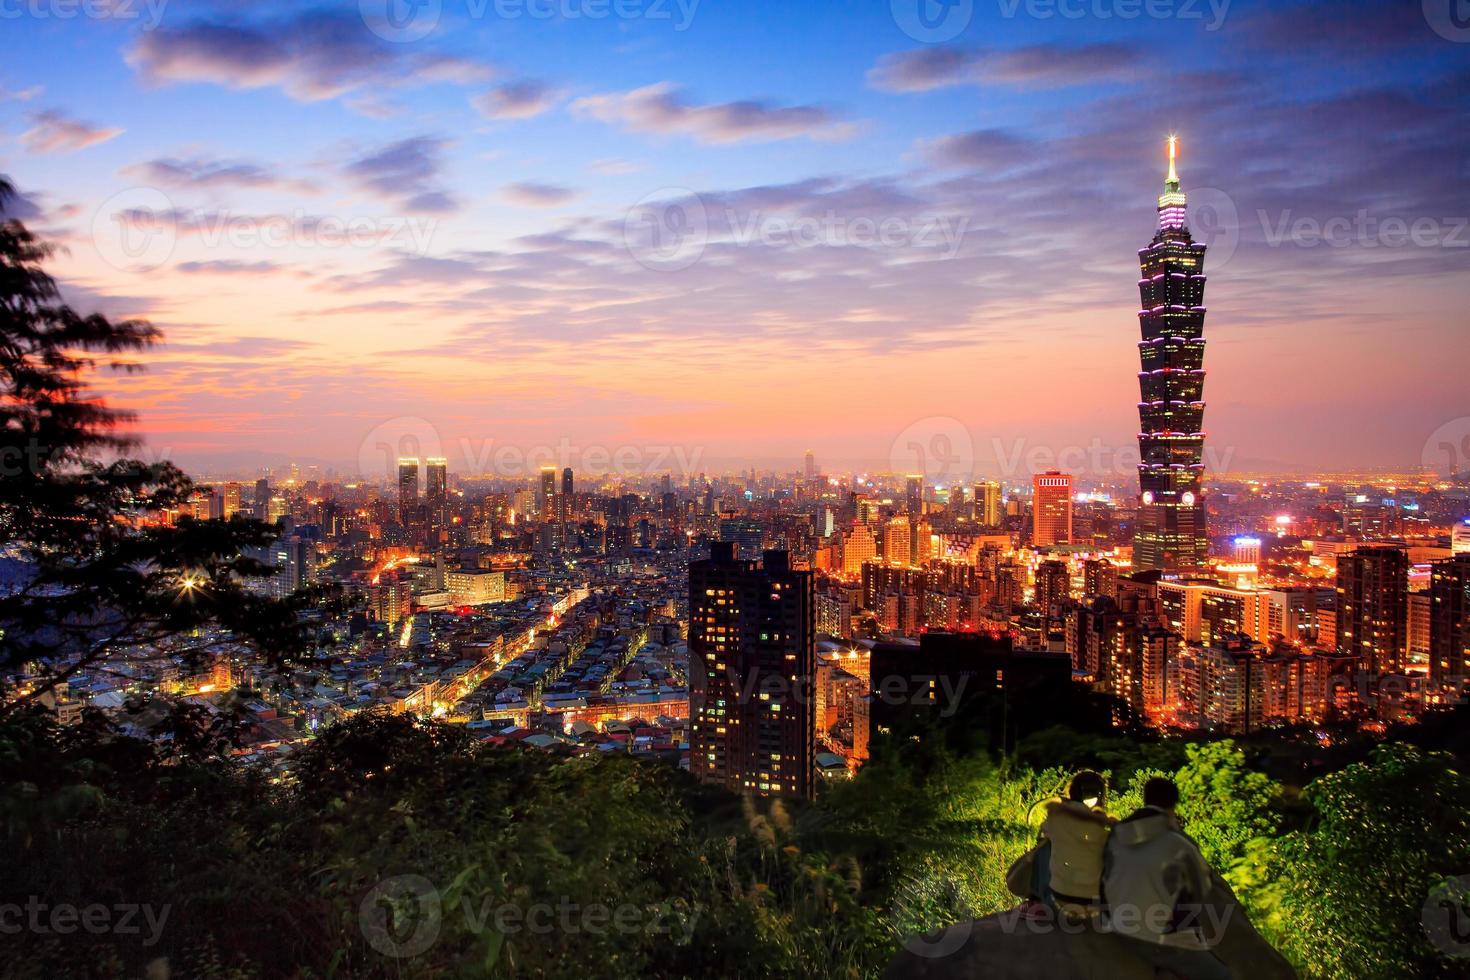 Landscape view of Taipei city at dusk photo